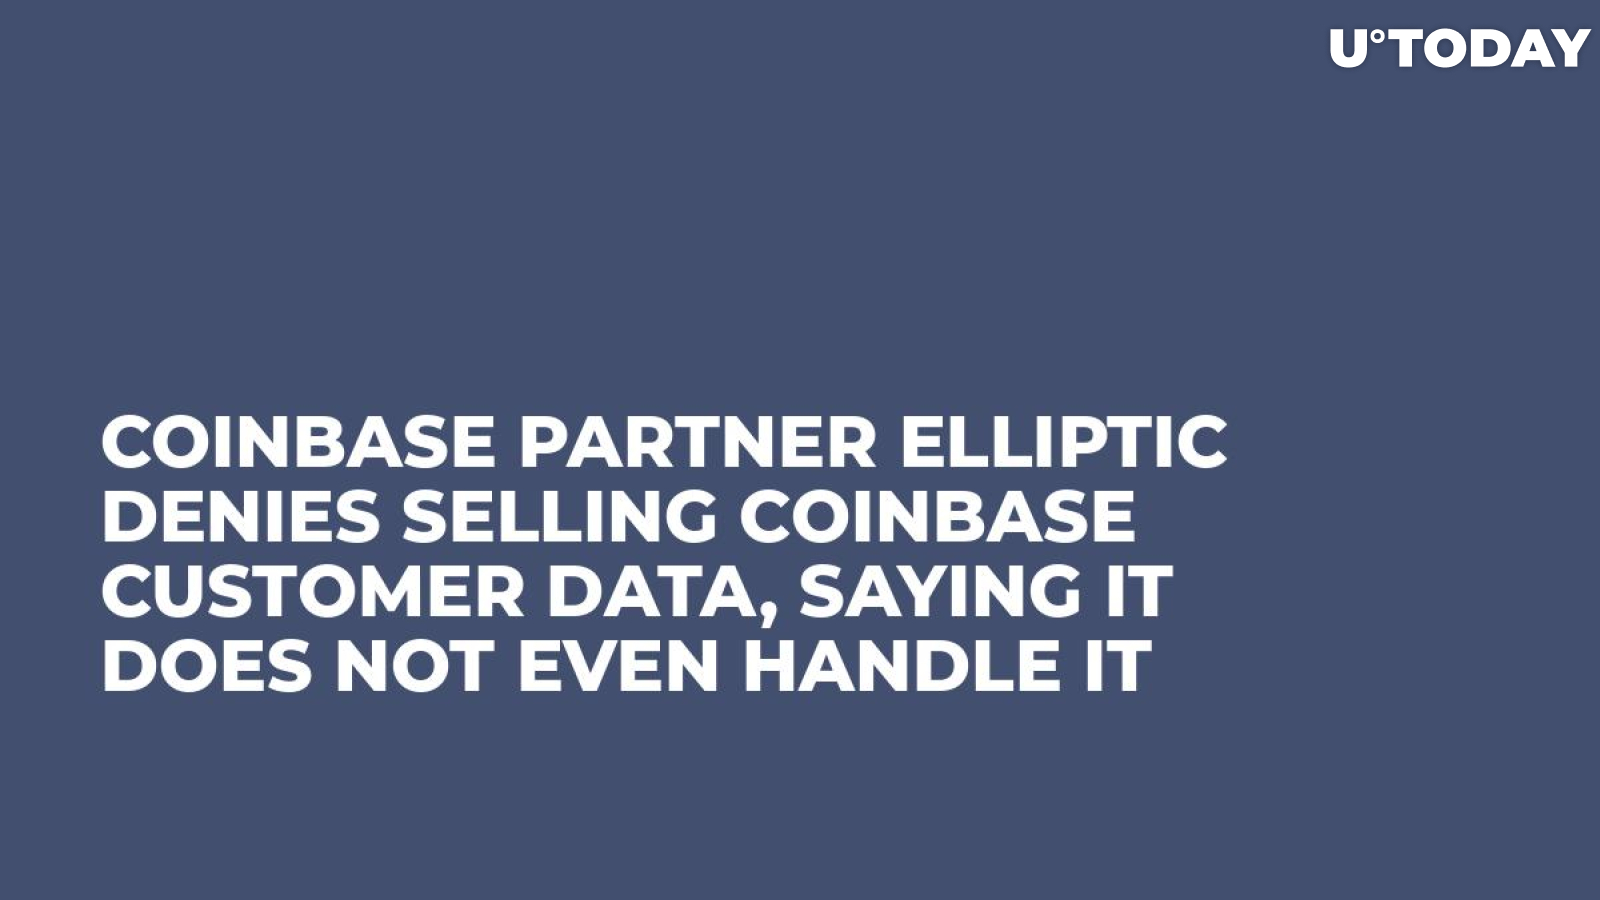 Coinbase Partner Elliptic Denies Selling Coinbase Customer Data, Saying It Does Not Even Handle It